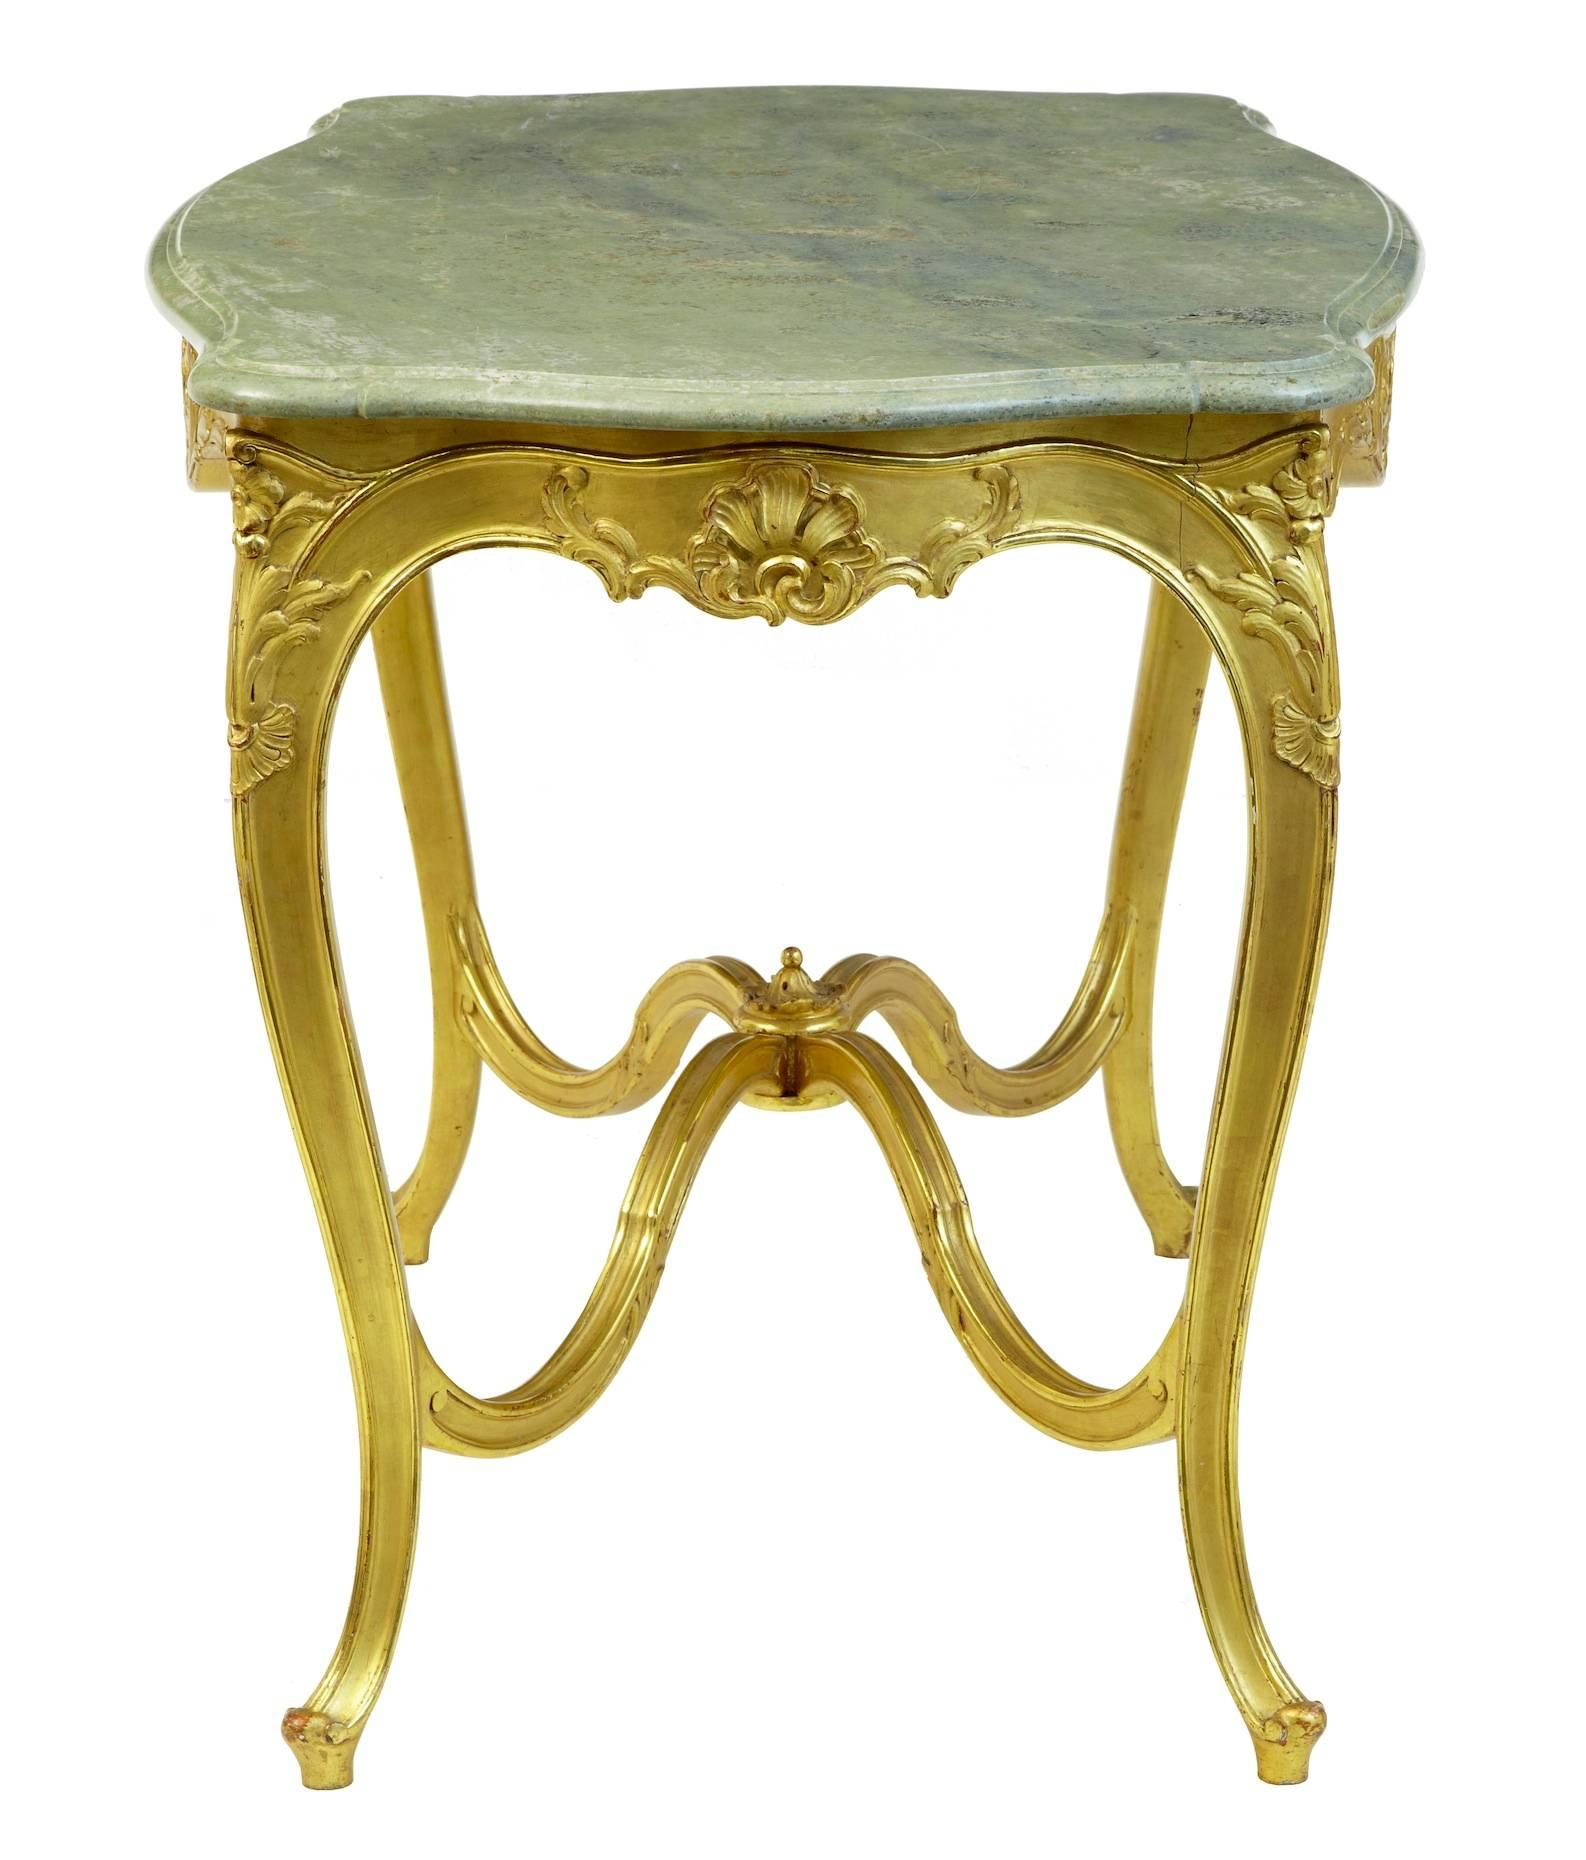 Giltwood Stunning Early 20th Century Six-Piece Gilt French Salon Suite